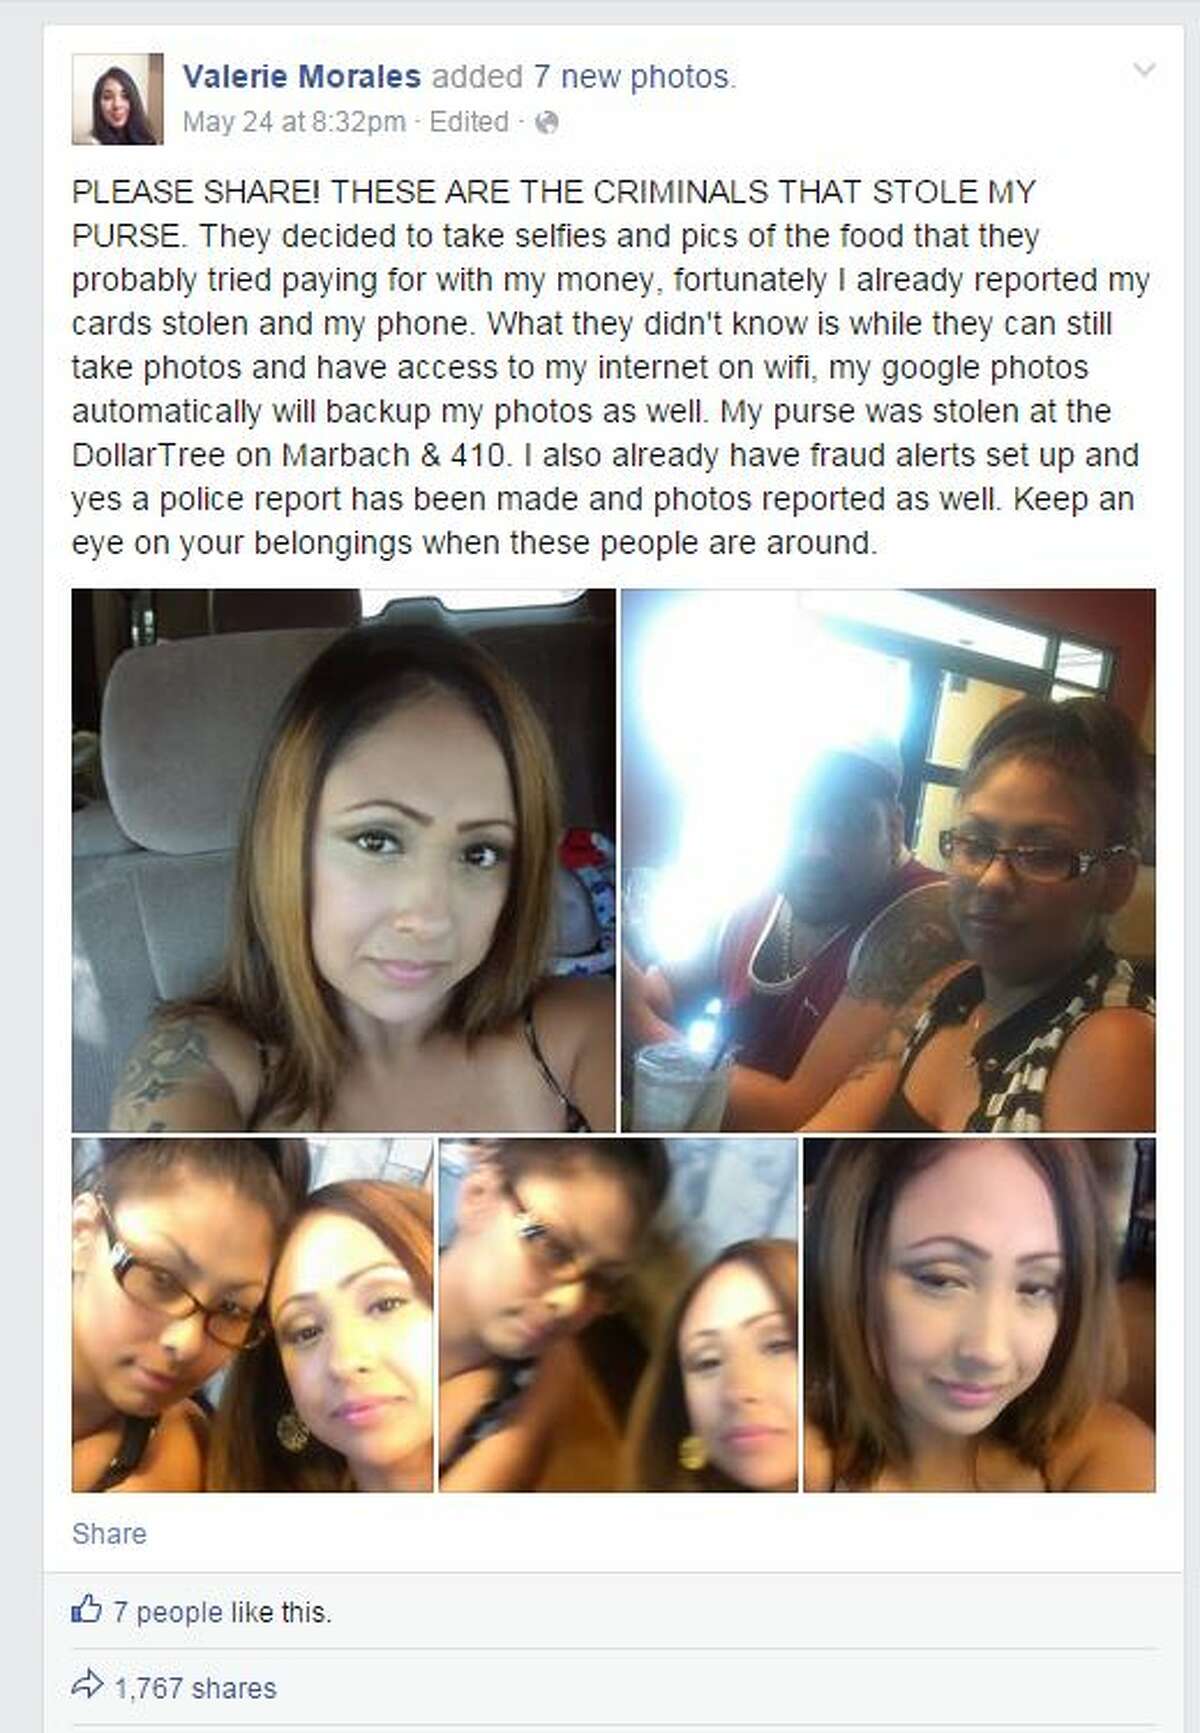 A woman claims these photos were taken by the person who allegedly stole her purse, which had her smart phone inside. The phone transferred the photos to her online account, and she shared them on Facebook.